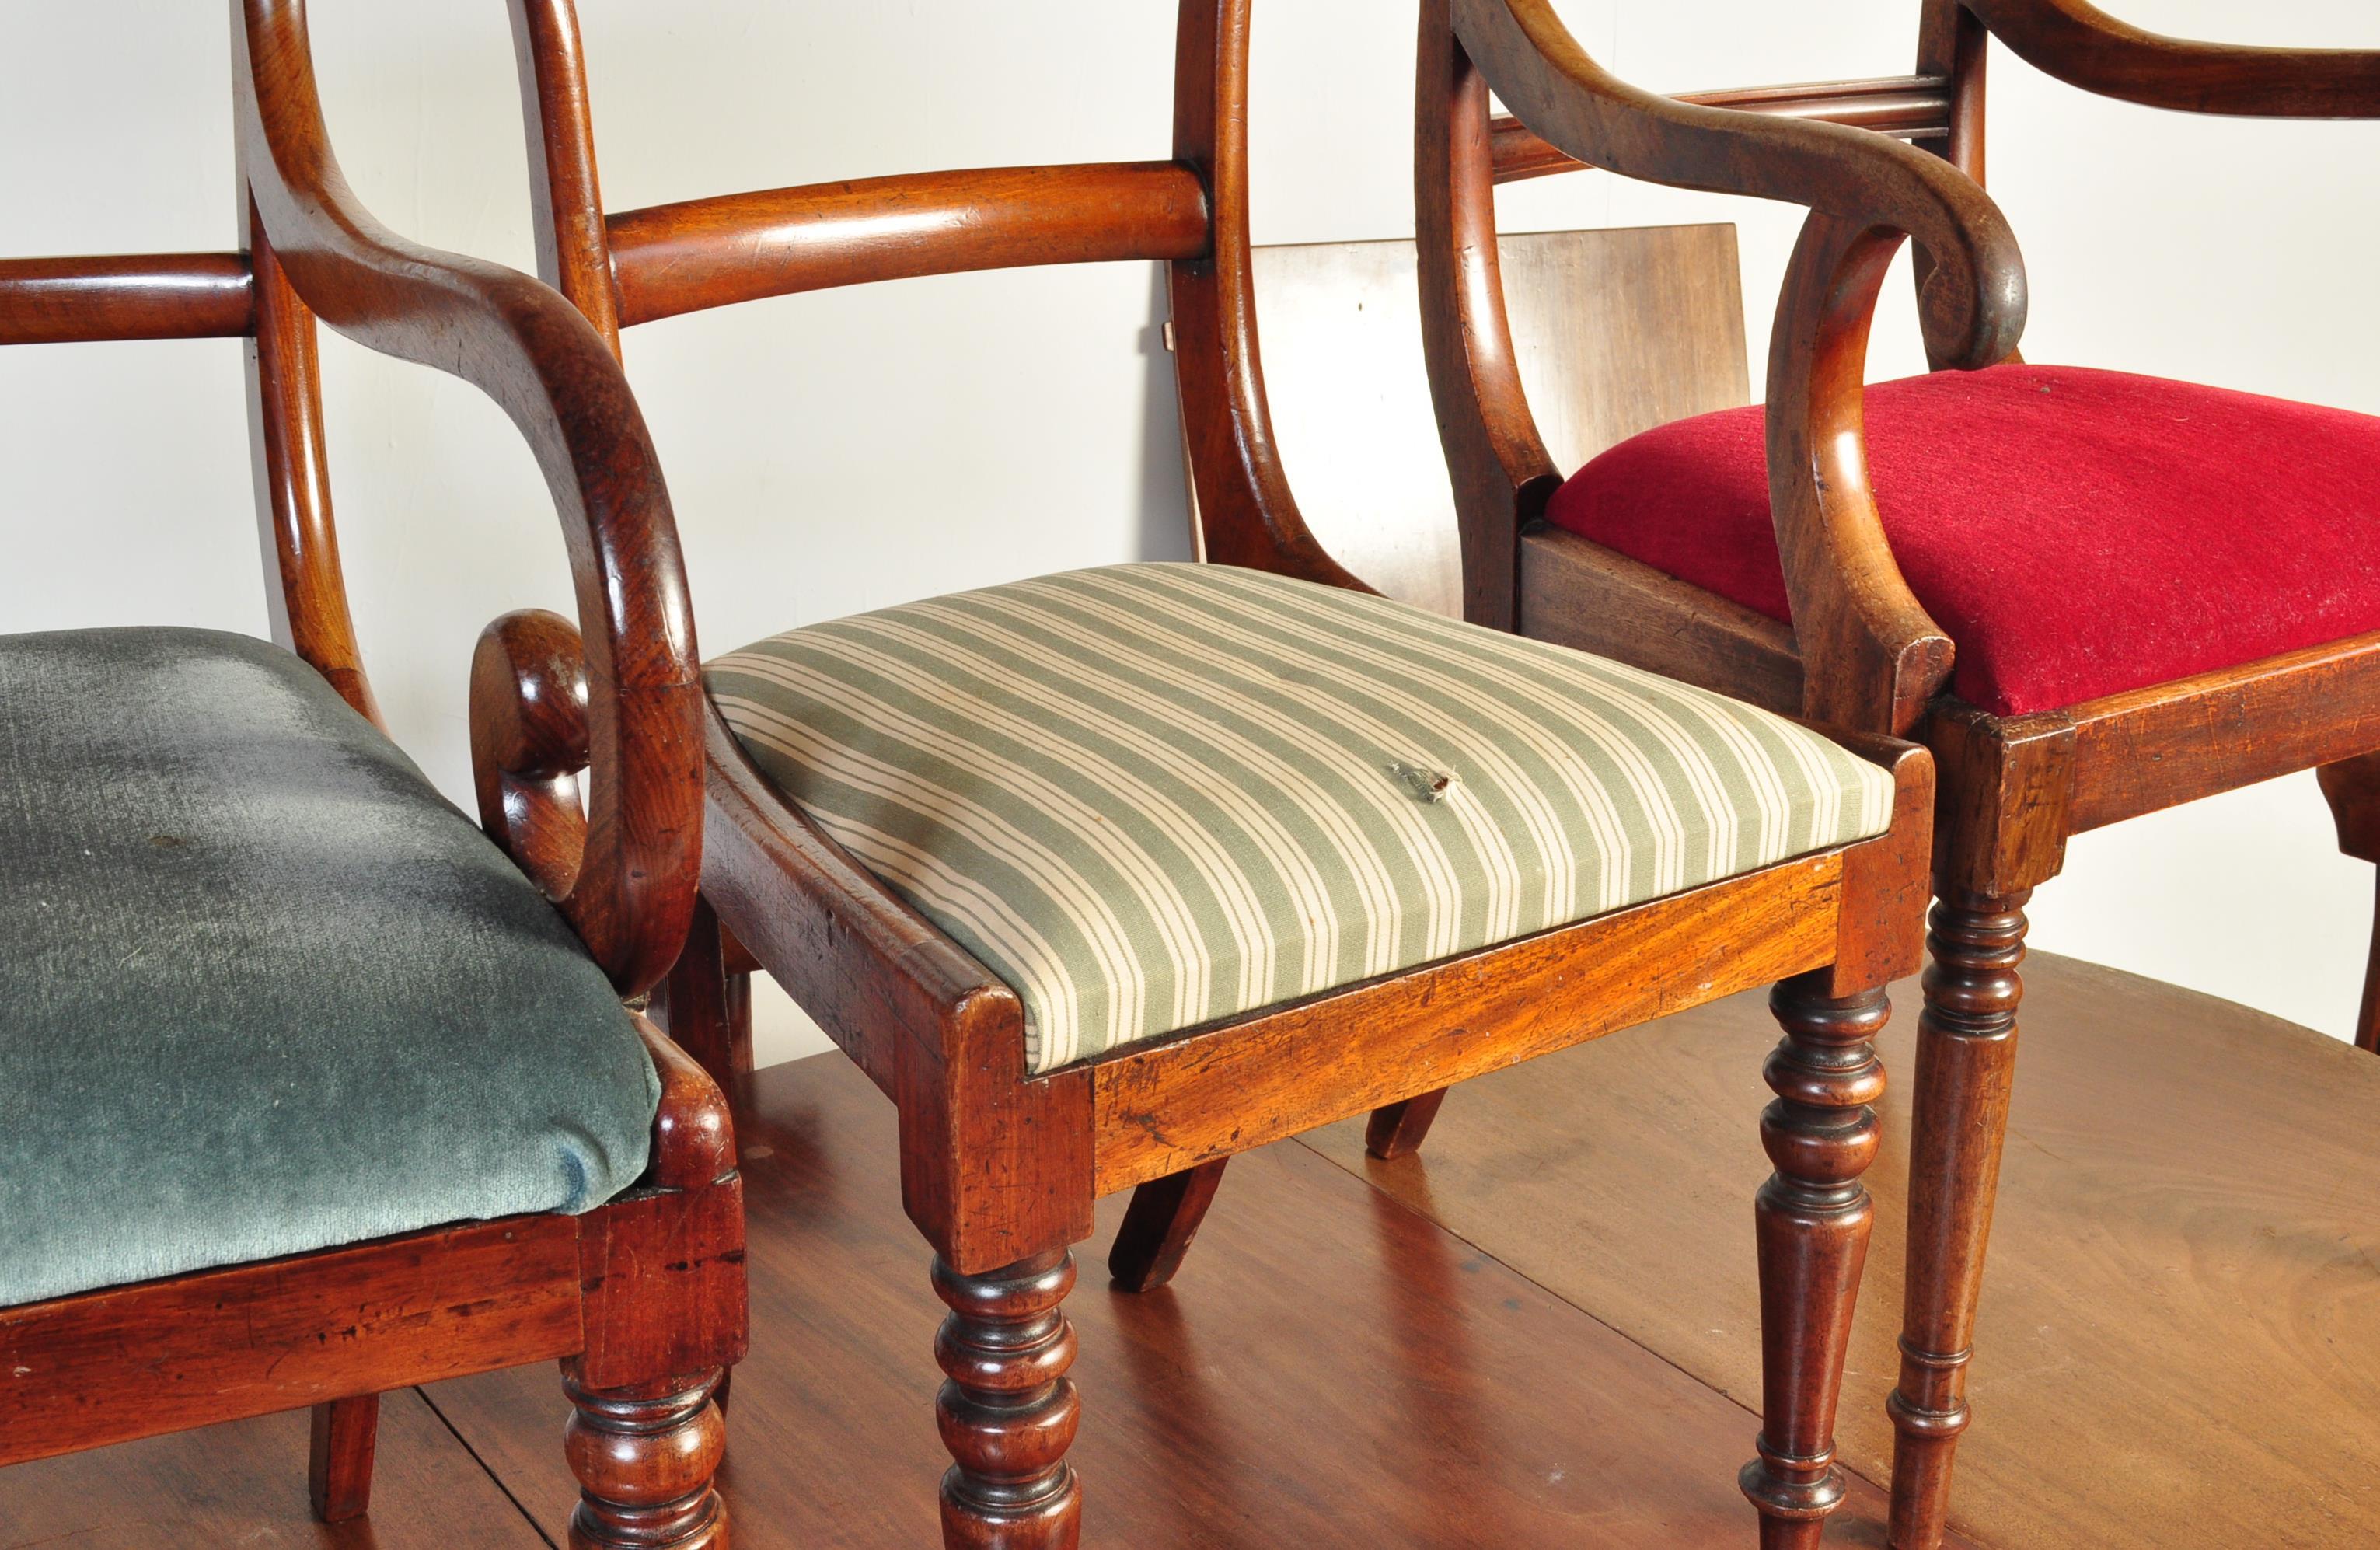 LONG RUN OF REGENCY CHAIRS AND D END TABLE WITH TWO LEAVES - Image 3 of 6